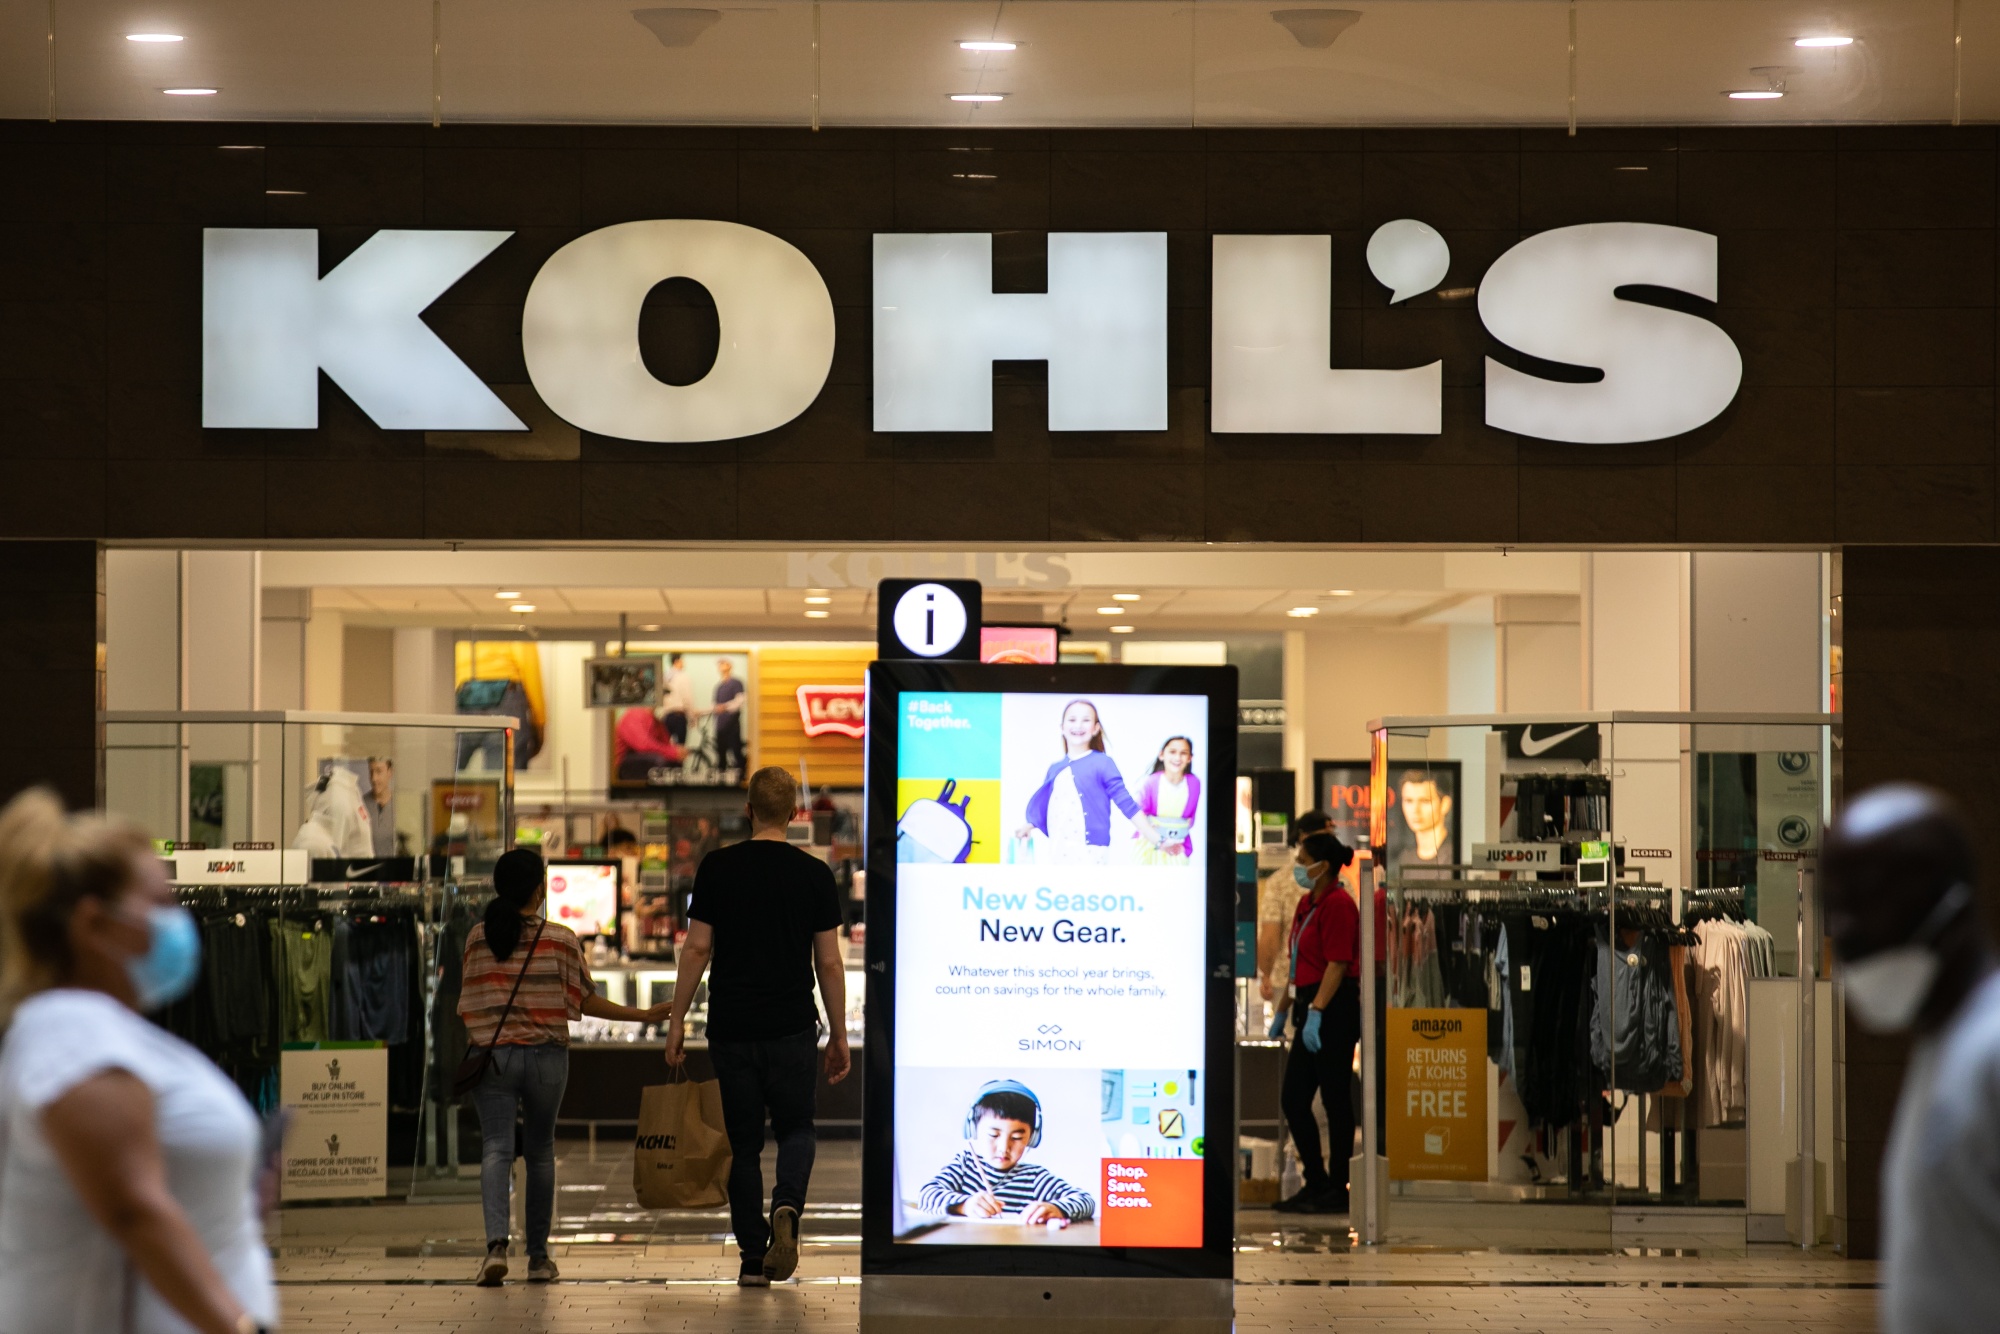 Kohl's ends talks of selling its company 